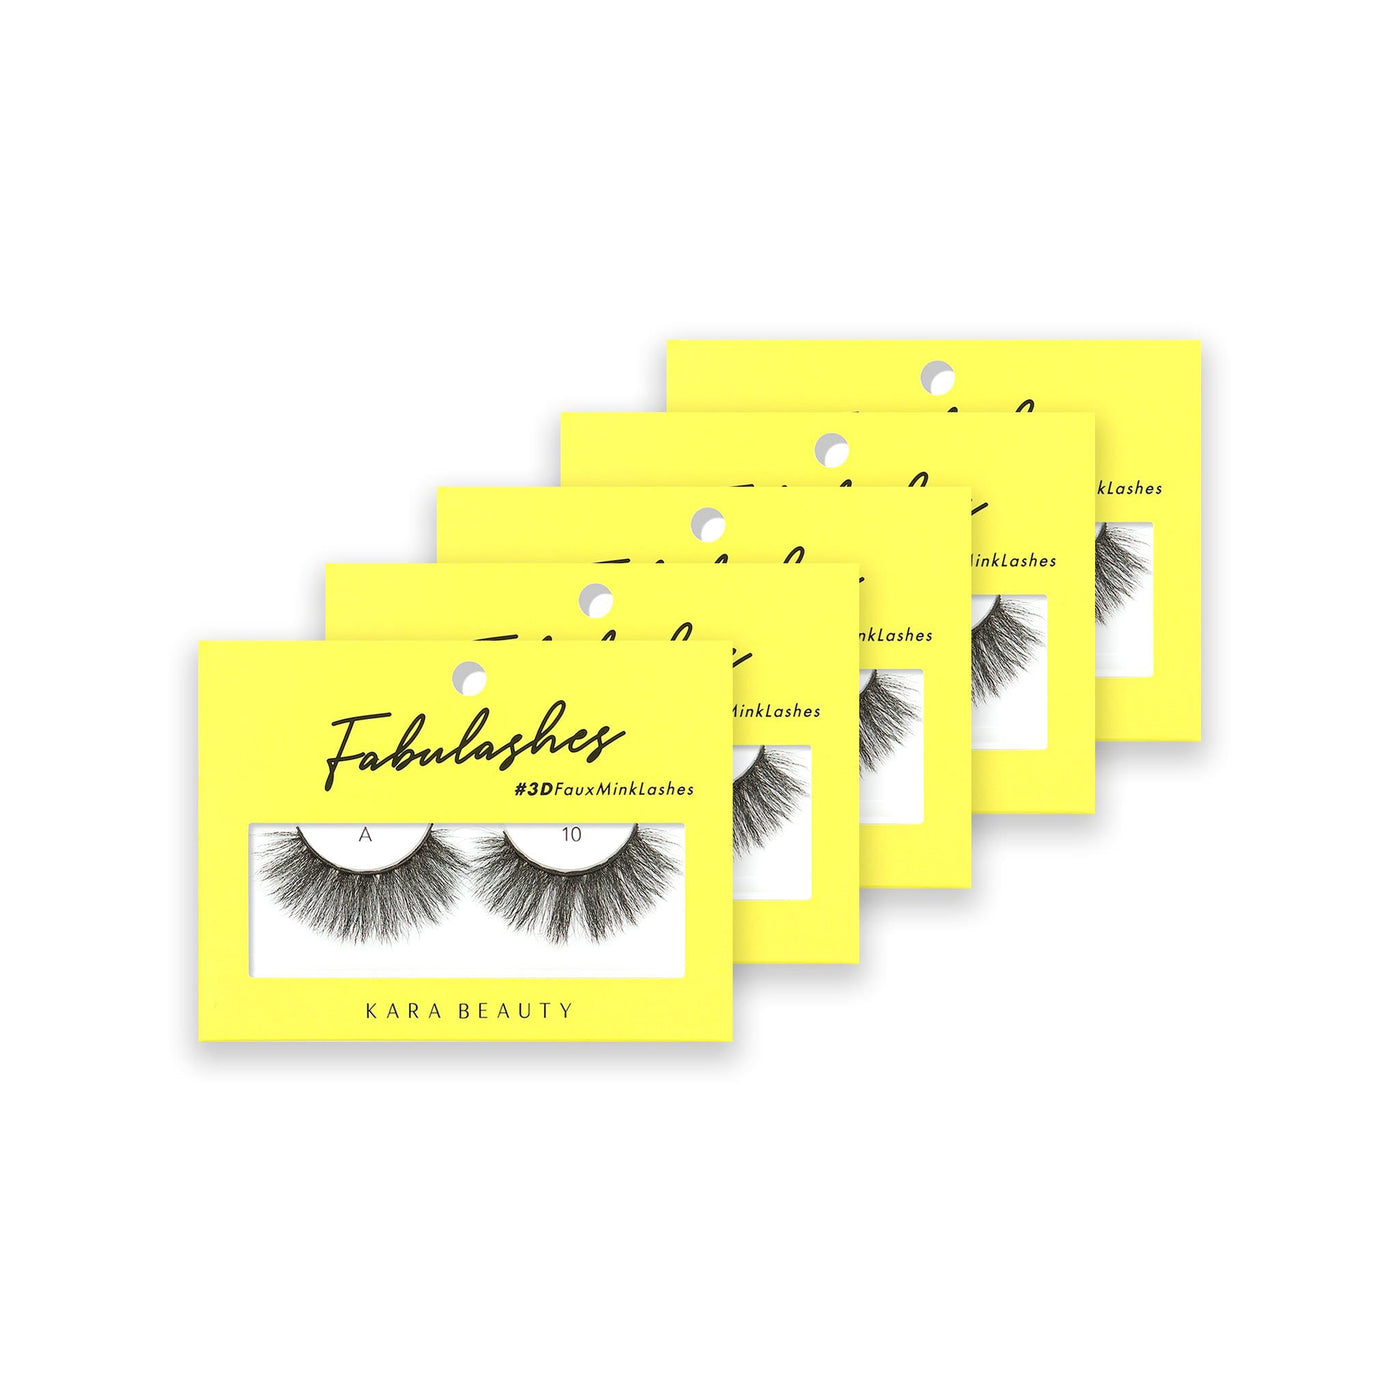 Style A10 Fabulashes 3D faux mink strip eyelashes 5 pack